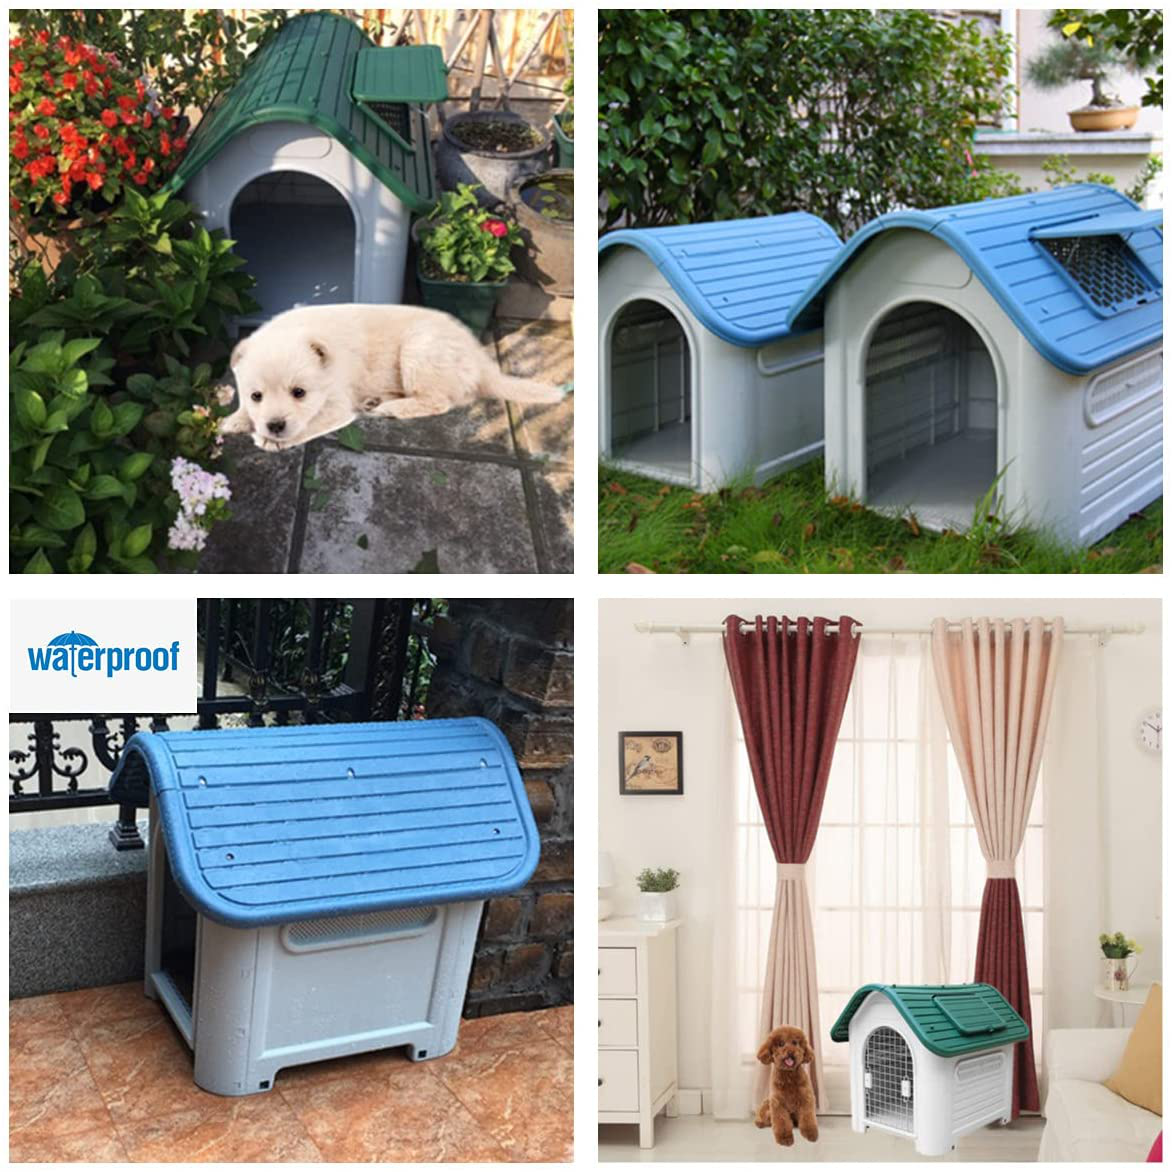 NC Pet Dog Large House Durable Waterproof Plastic Indoor Outdoor Puppy Shelter Kennel Detachable Design with Air Vents and Elevated Floor (Large, Blue)